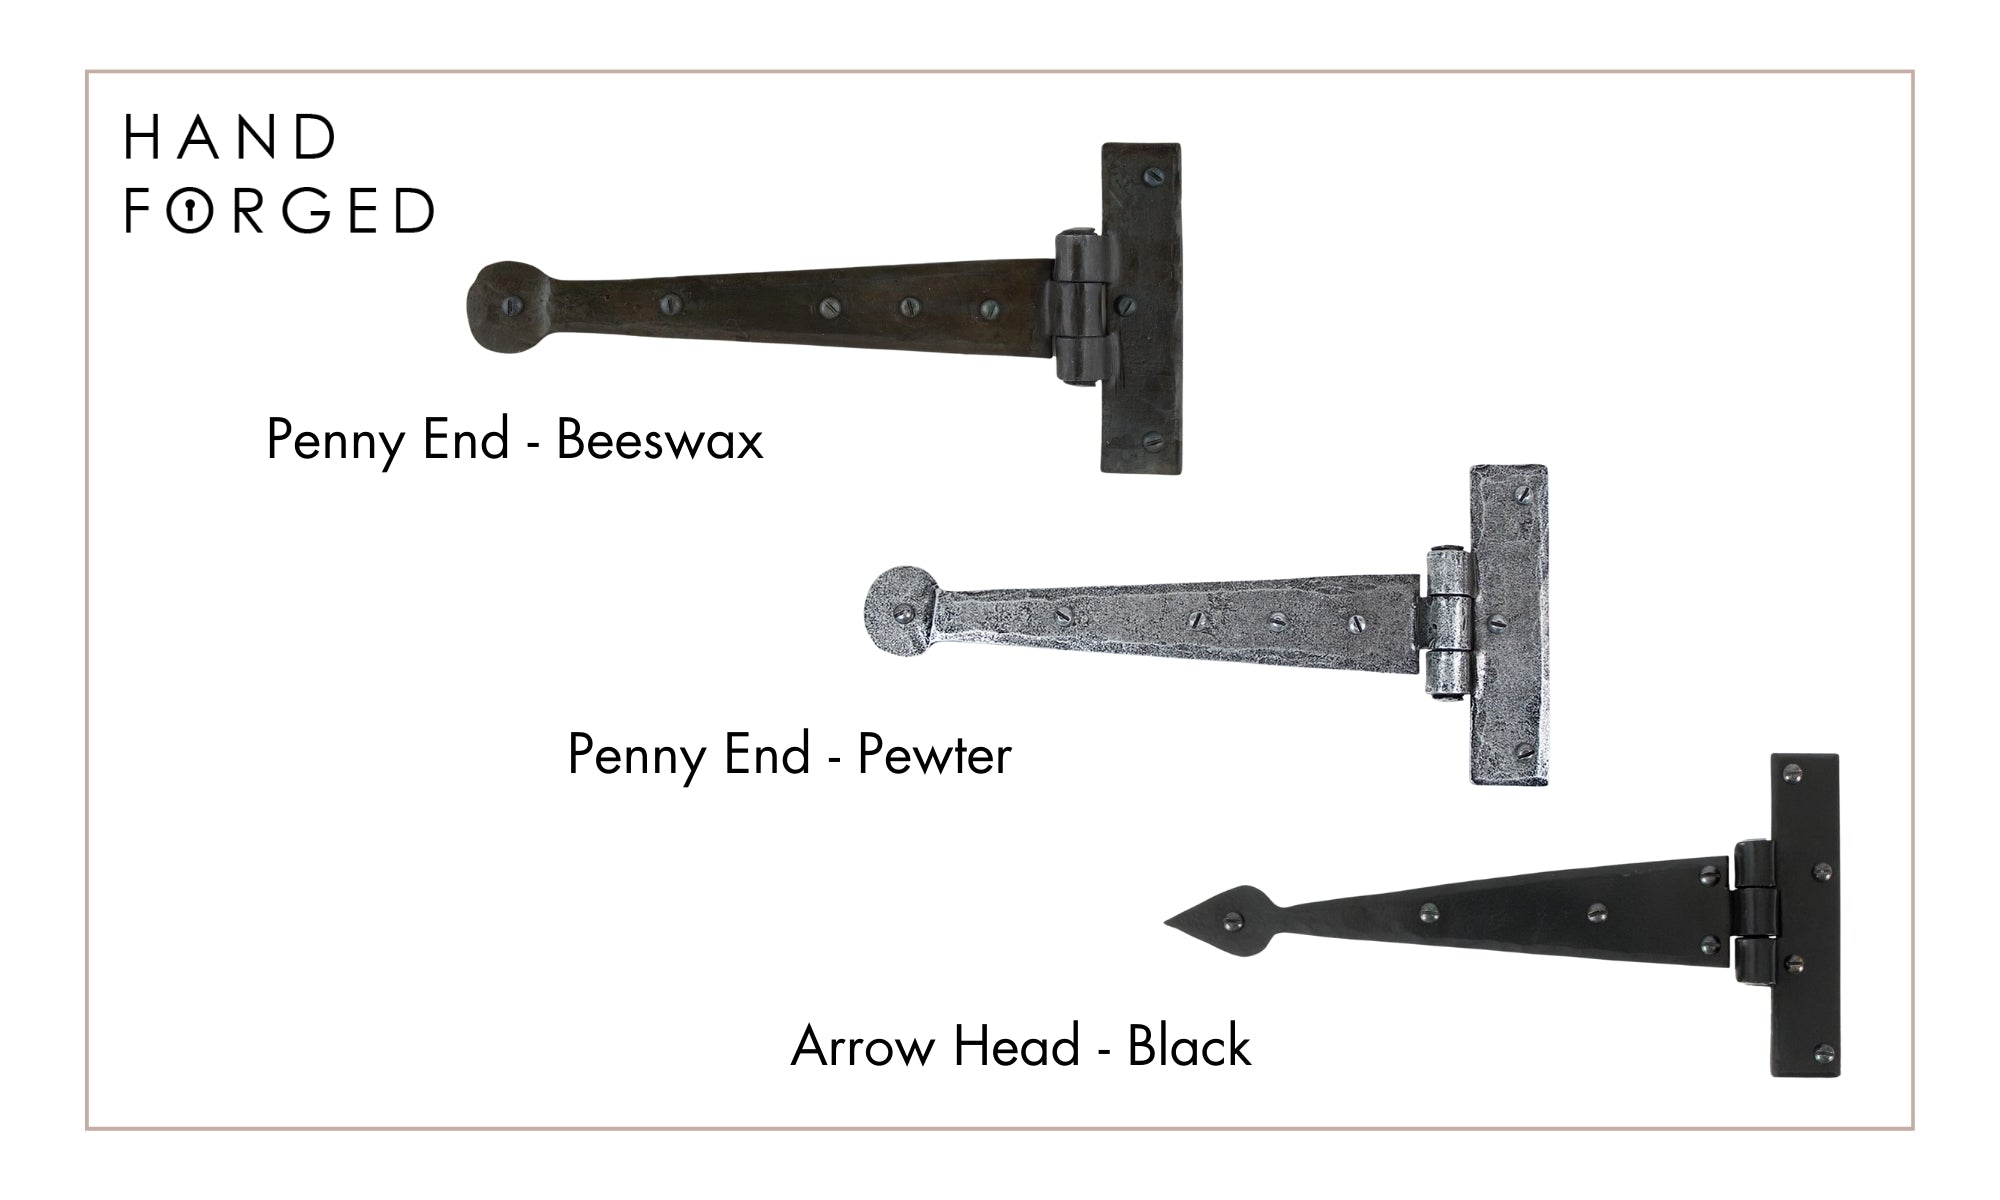 Diagram of different From The Anvil T hinges including a Beeswax Penny End T hinge, Pewter Penny End T hinge, and a Black Arrow Head T hinge.